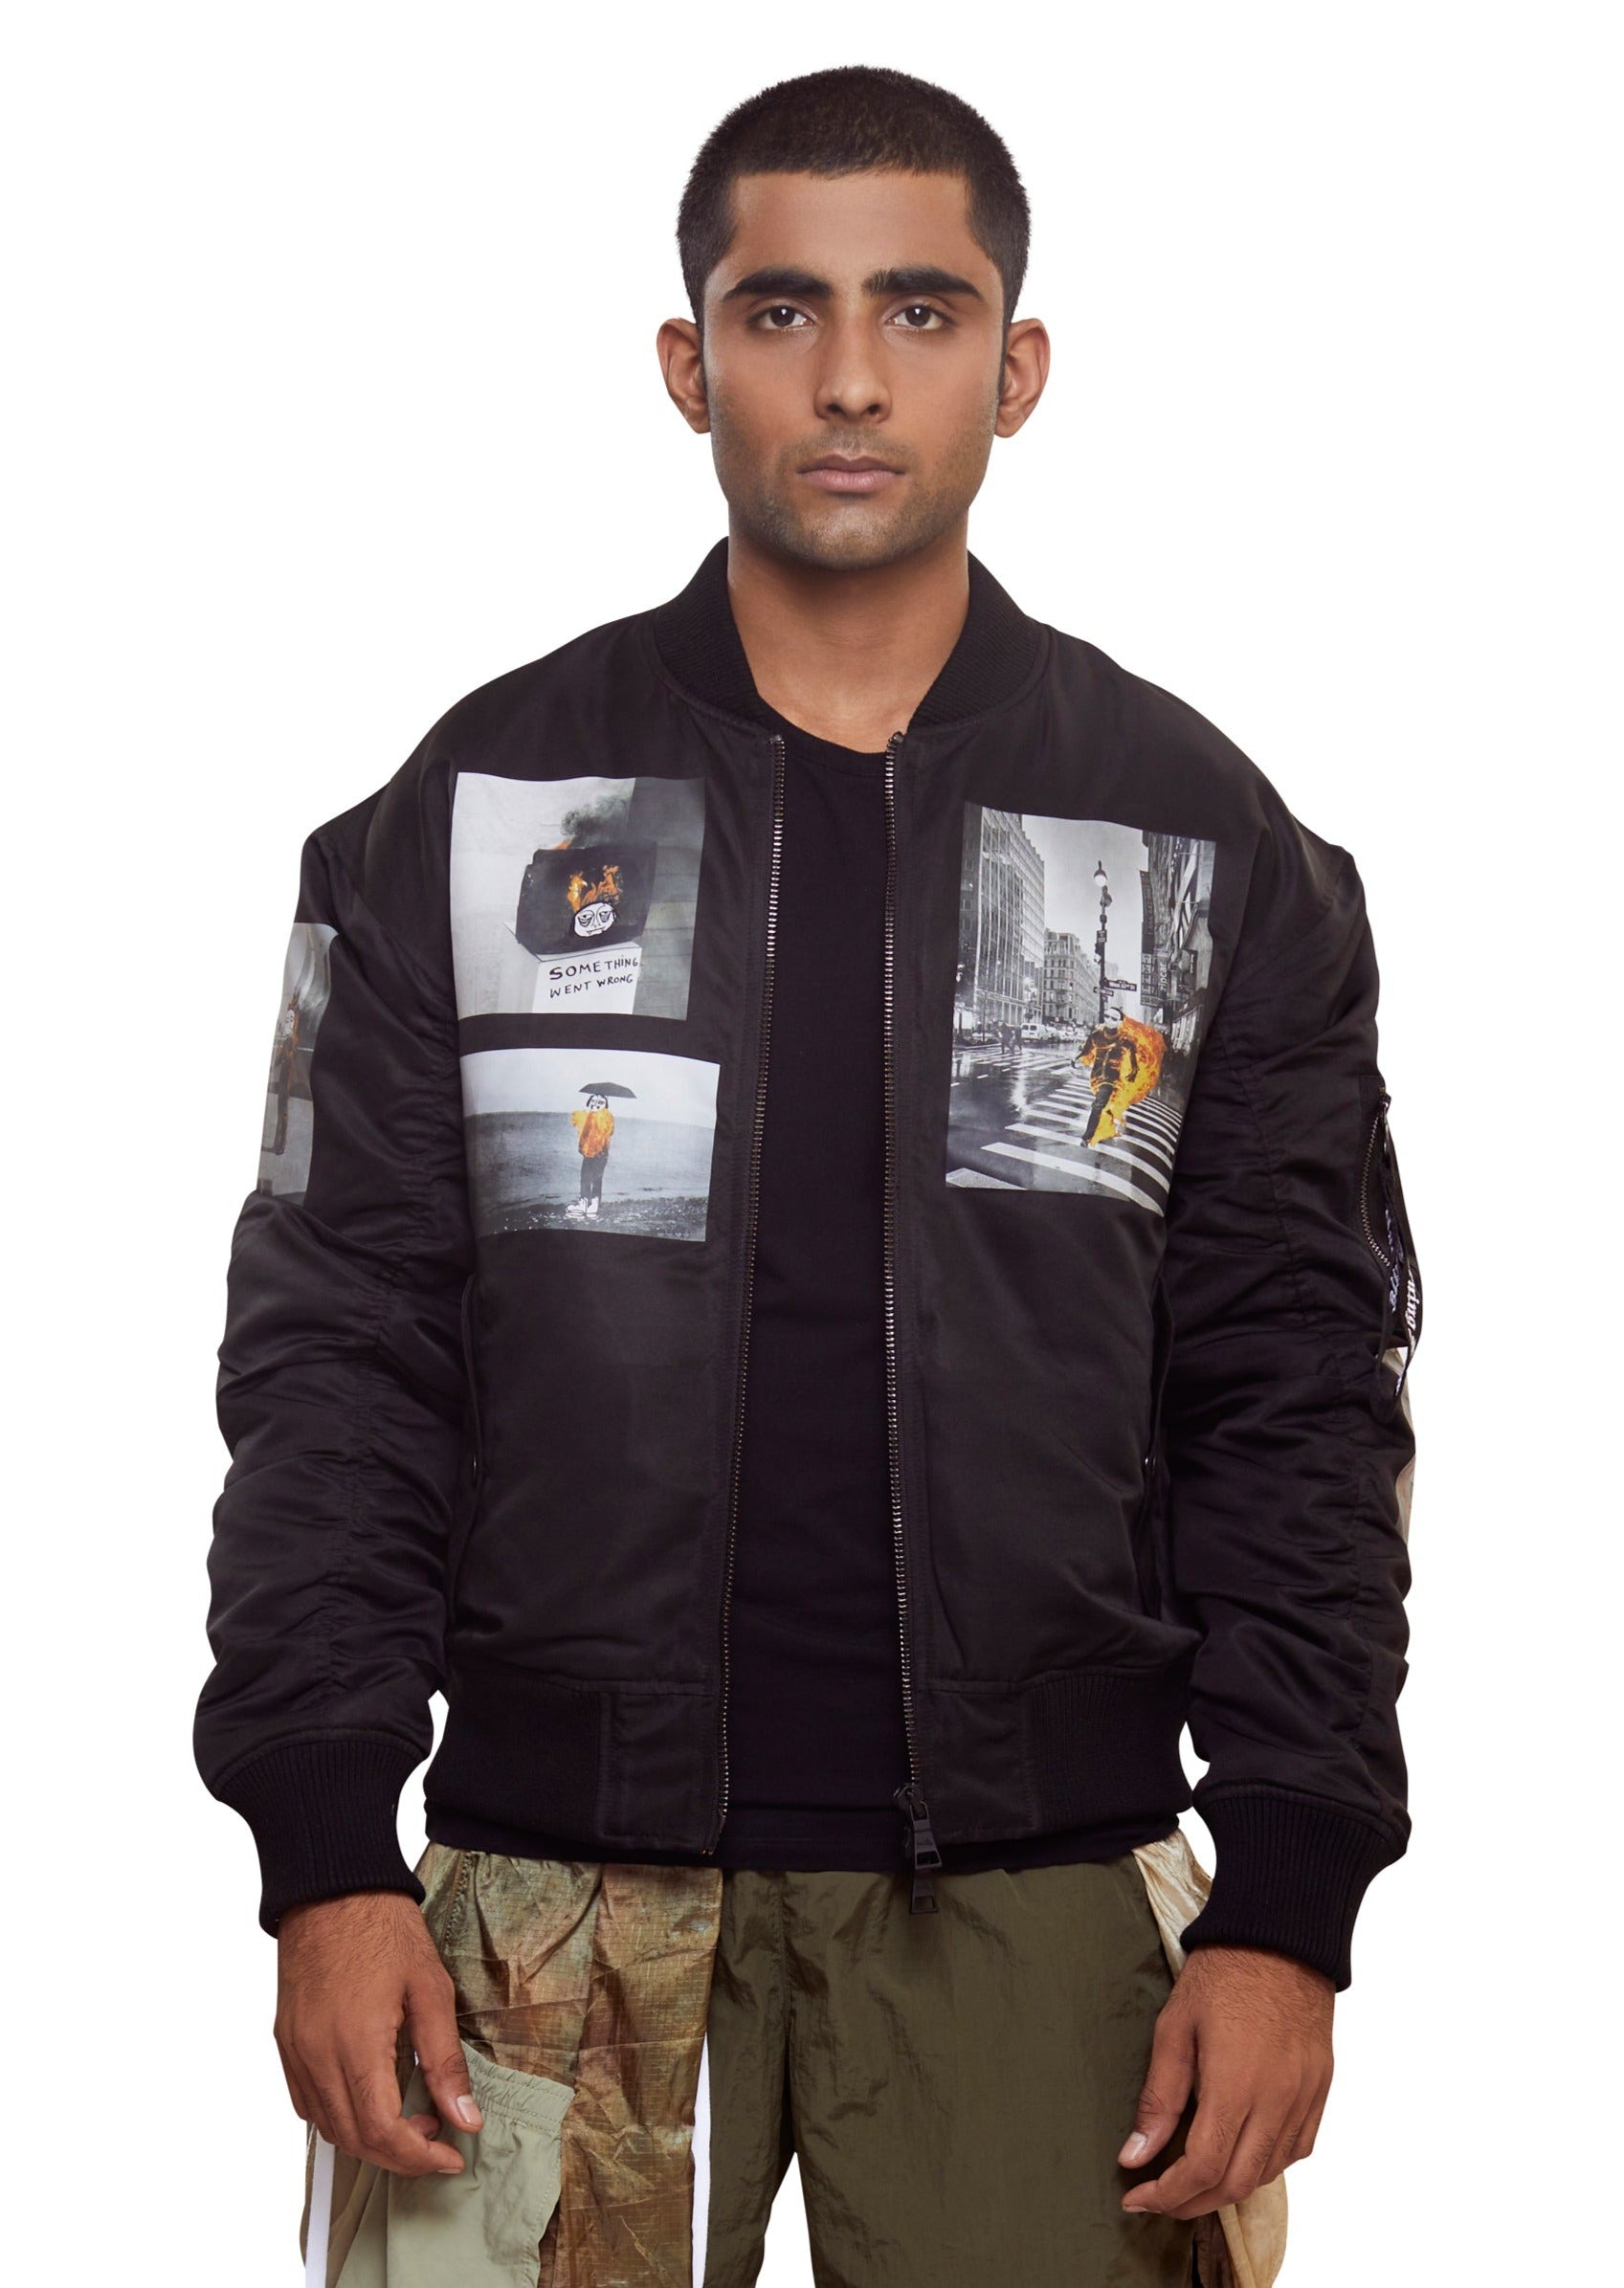 Black Long-sleeved Drop shoulder Embroidered and Printed Bomber jacket from the brand Haculla